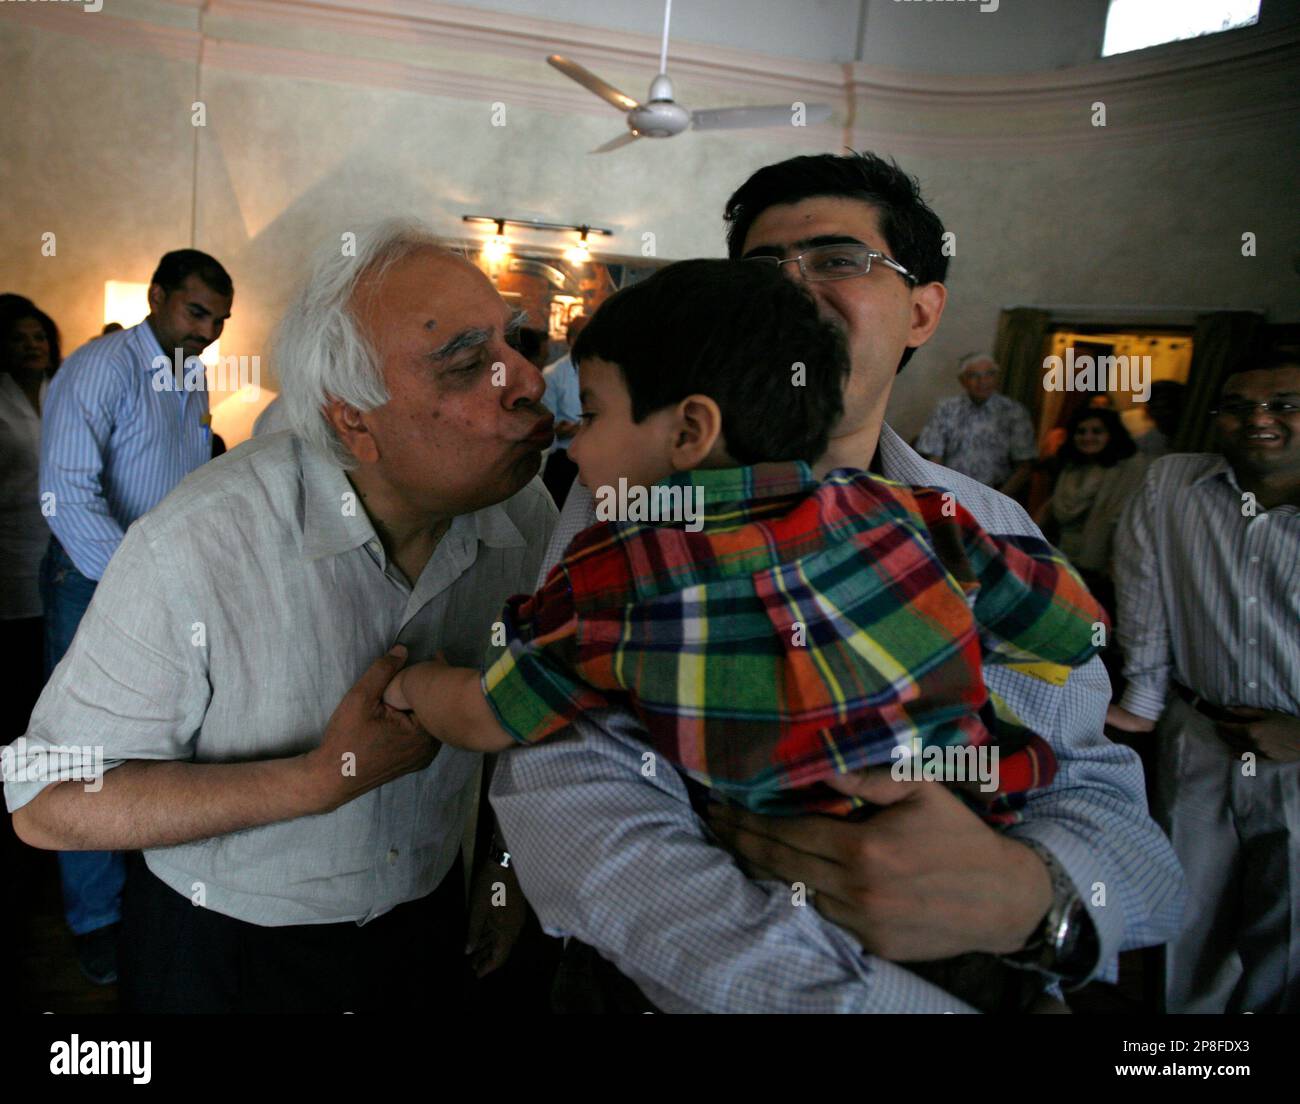 Congress party leader Kapil Sibal, left, kisses his grandson after winning from his constituency in New Delhi, India, Saturday, May 16, 2009. Indian Prime Minister Manmohan Singh declared victory in India's national elections on Saturday, saying voters had given the Congress party-led coalition a "massive mandate." (AP Photo/Mustafa Quraishi) Stock Photo